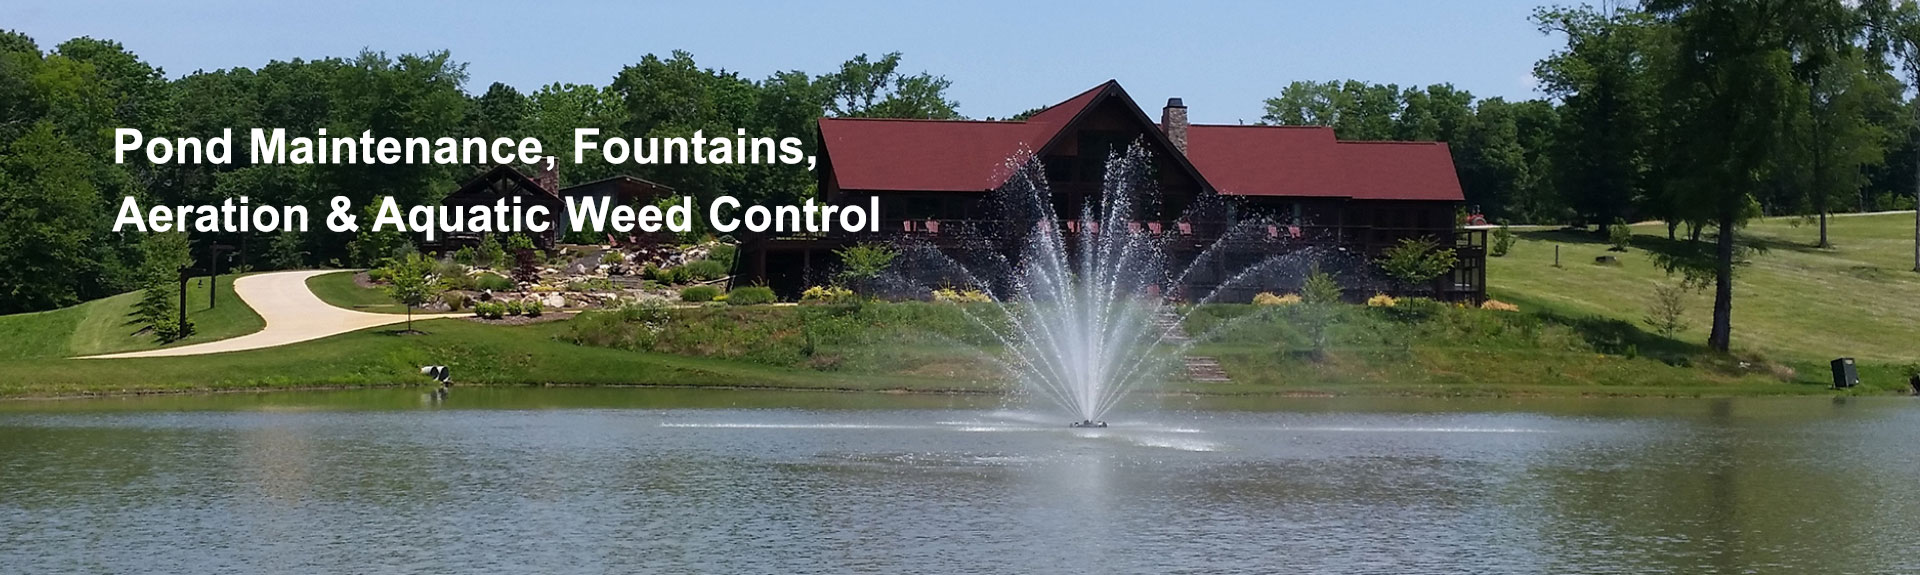 Pond Maintenance, Weed Control, Fountains and Aeration